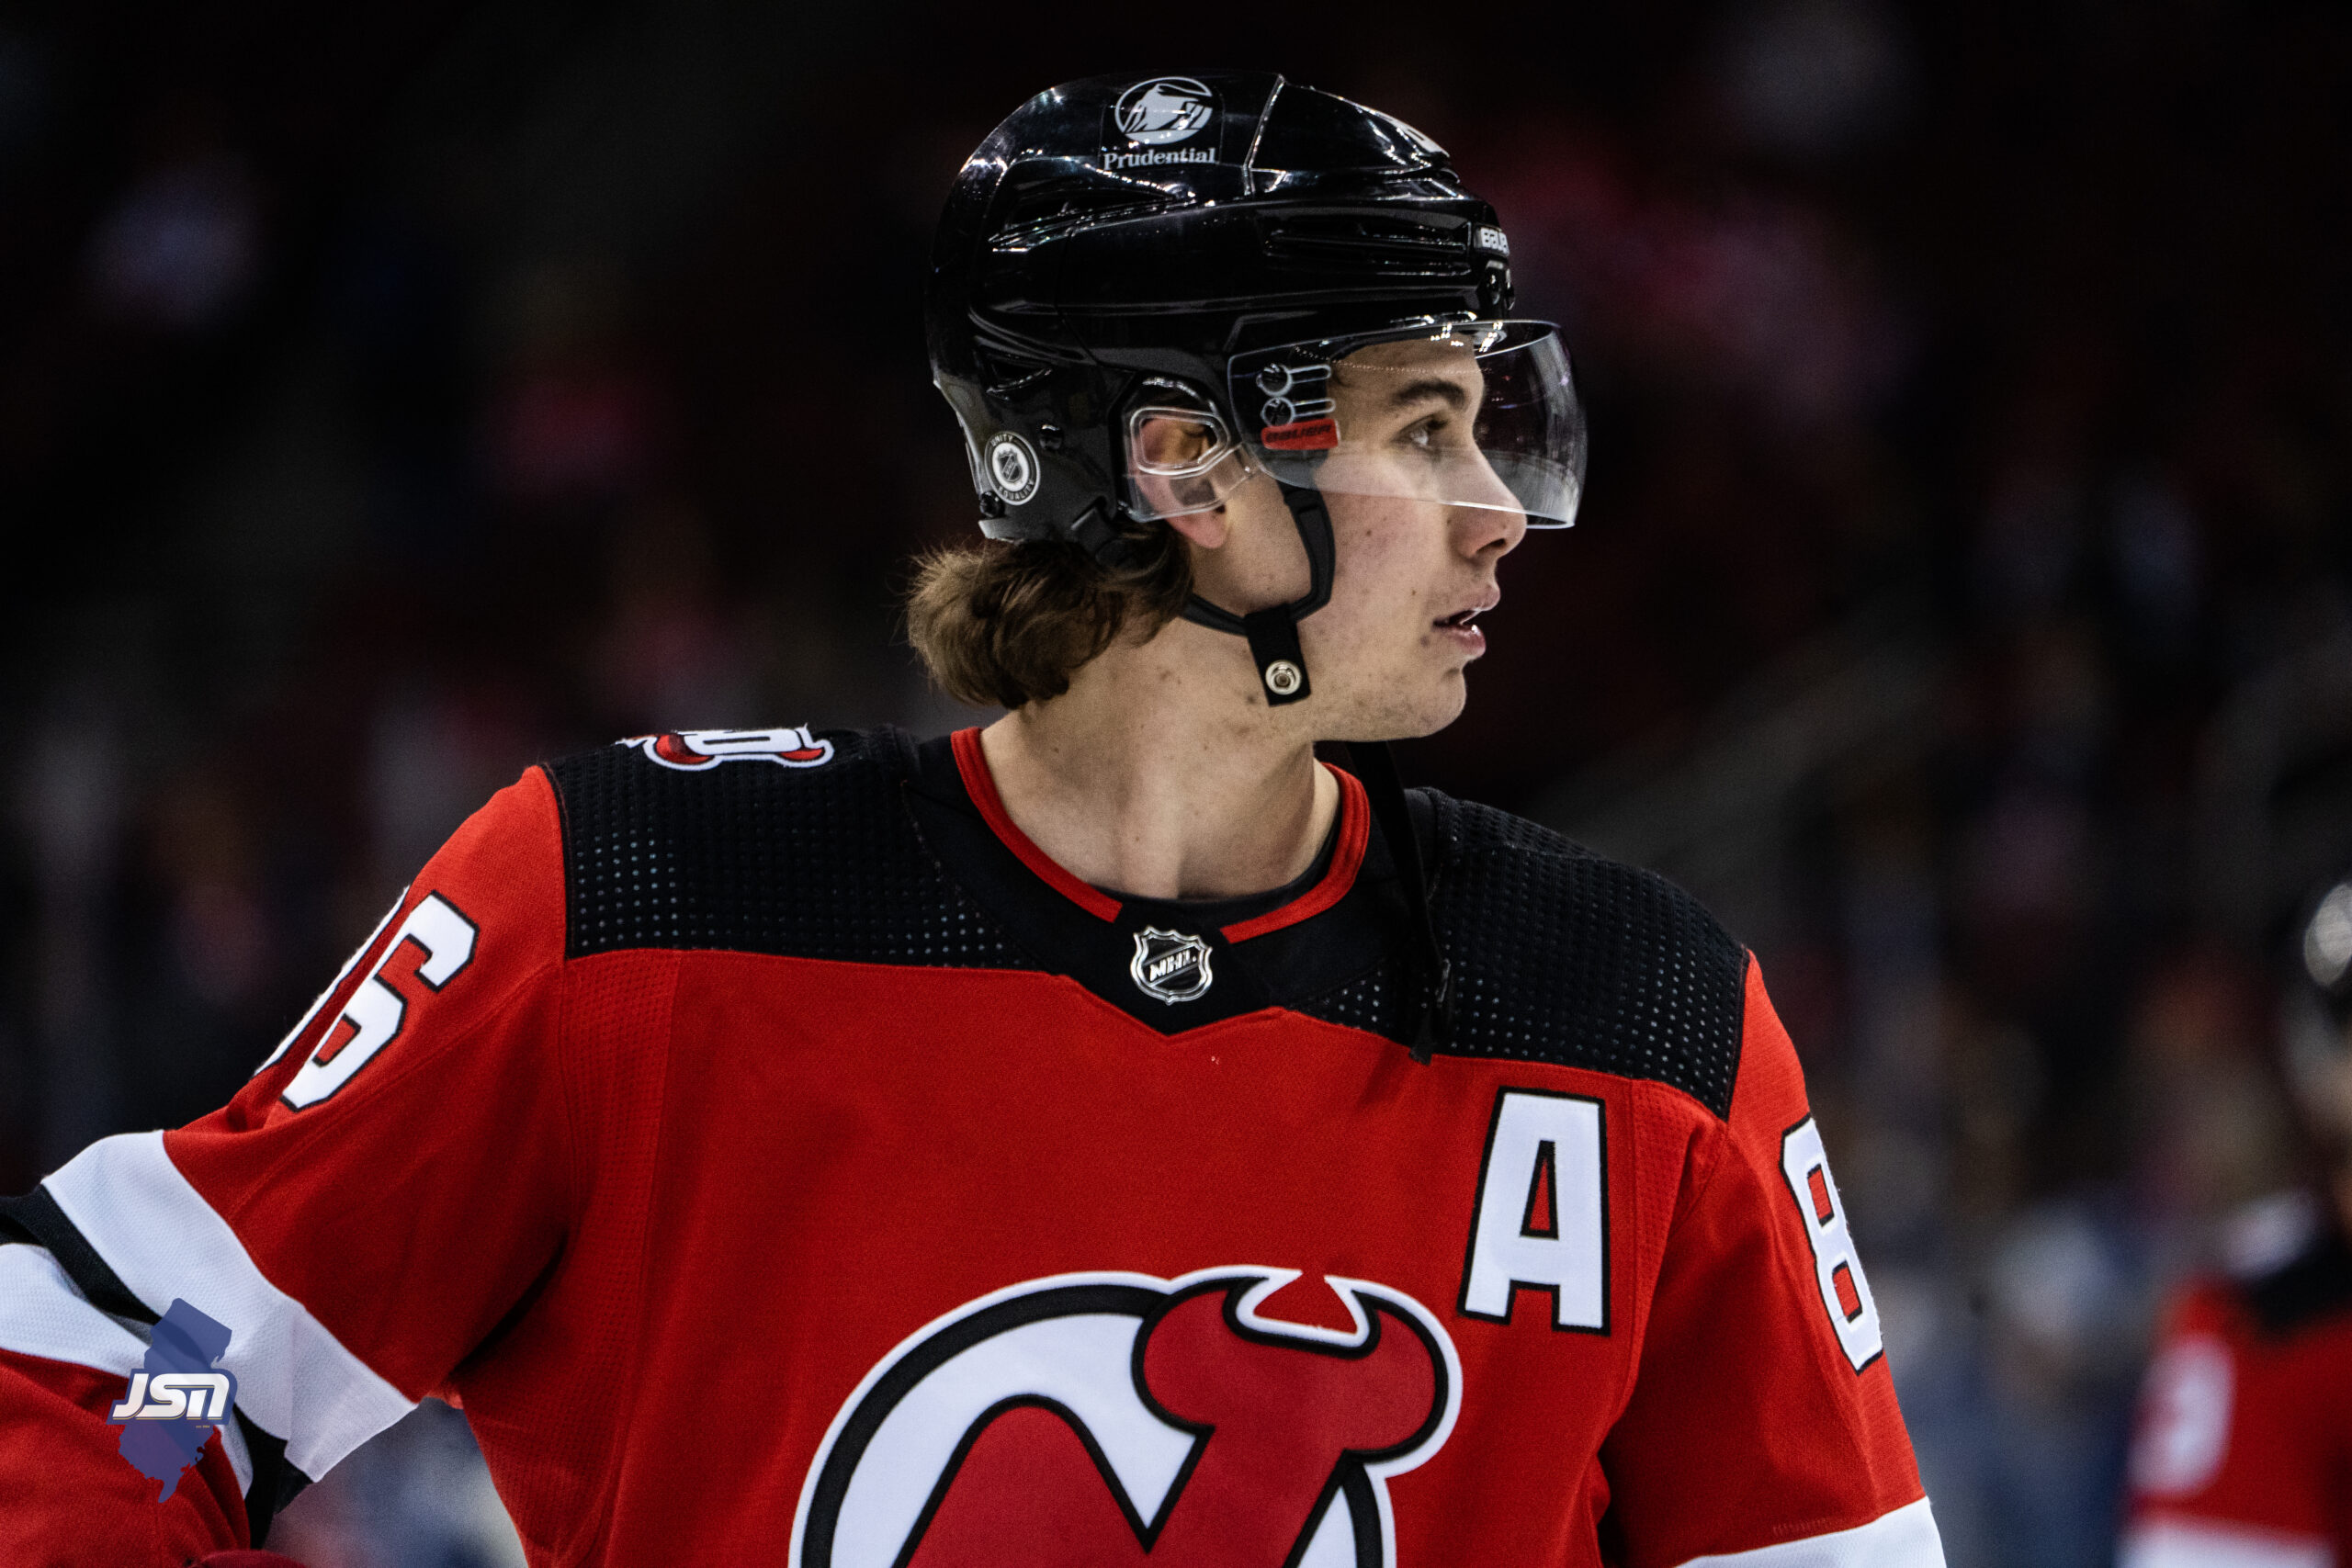 Jack Hughes of the New Jersey Devils